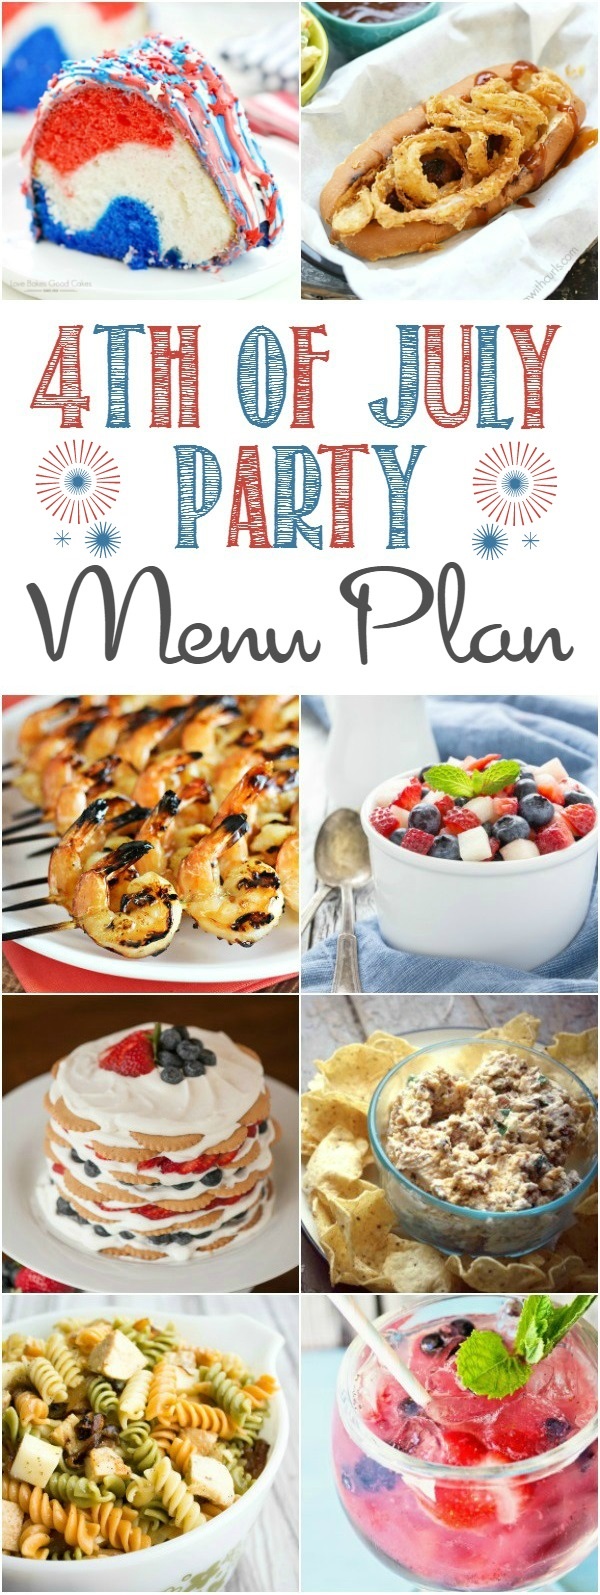 I've got all your 4th of July Party Essentials for the perfect holiday party. Whether you are relaxing at home or planning a picnic at the park to watch fireworks this 4th of July Party Menu is just what you need. #4thofJuly #fourthofjuly #party #menuplan via @slingmama